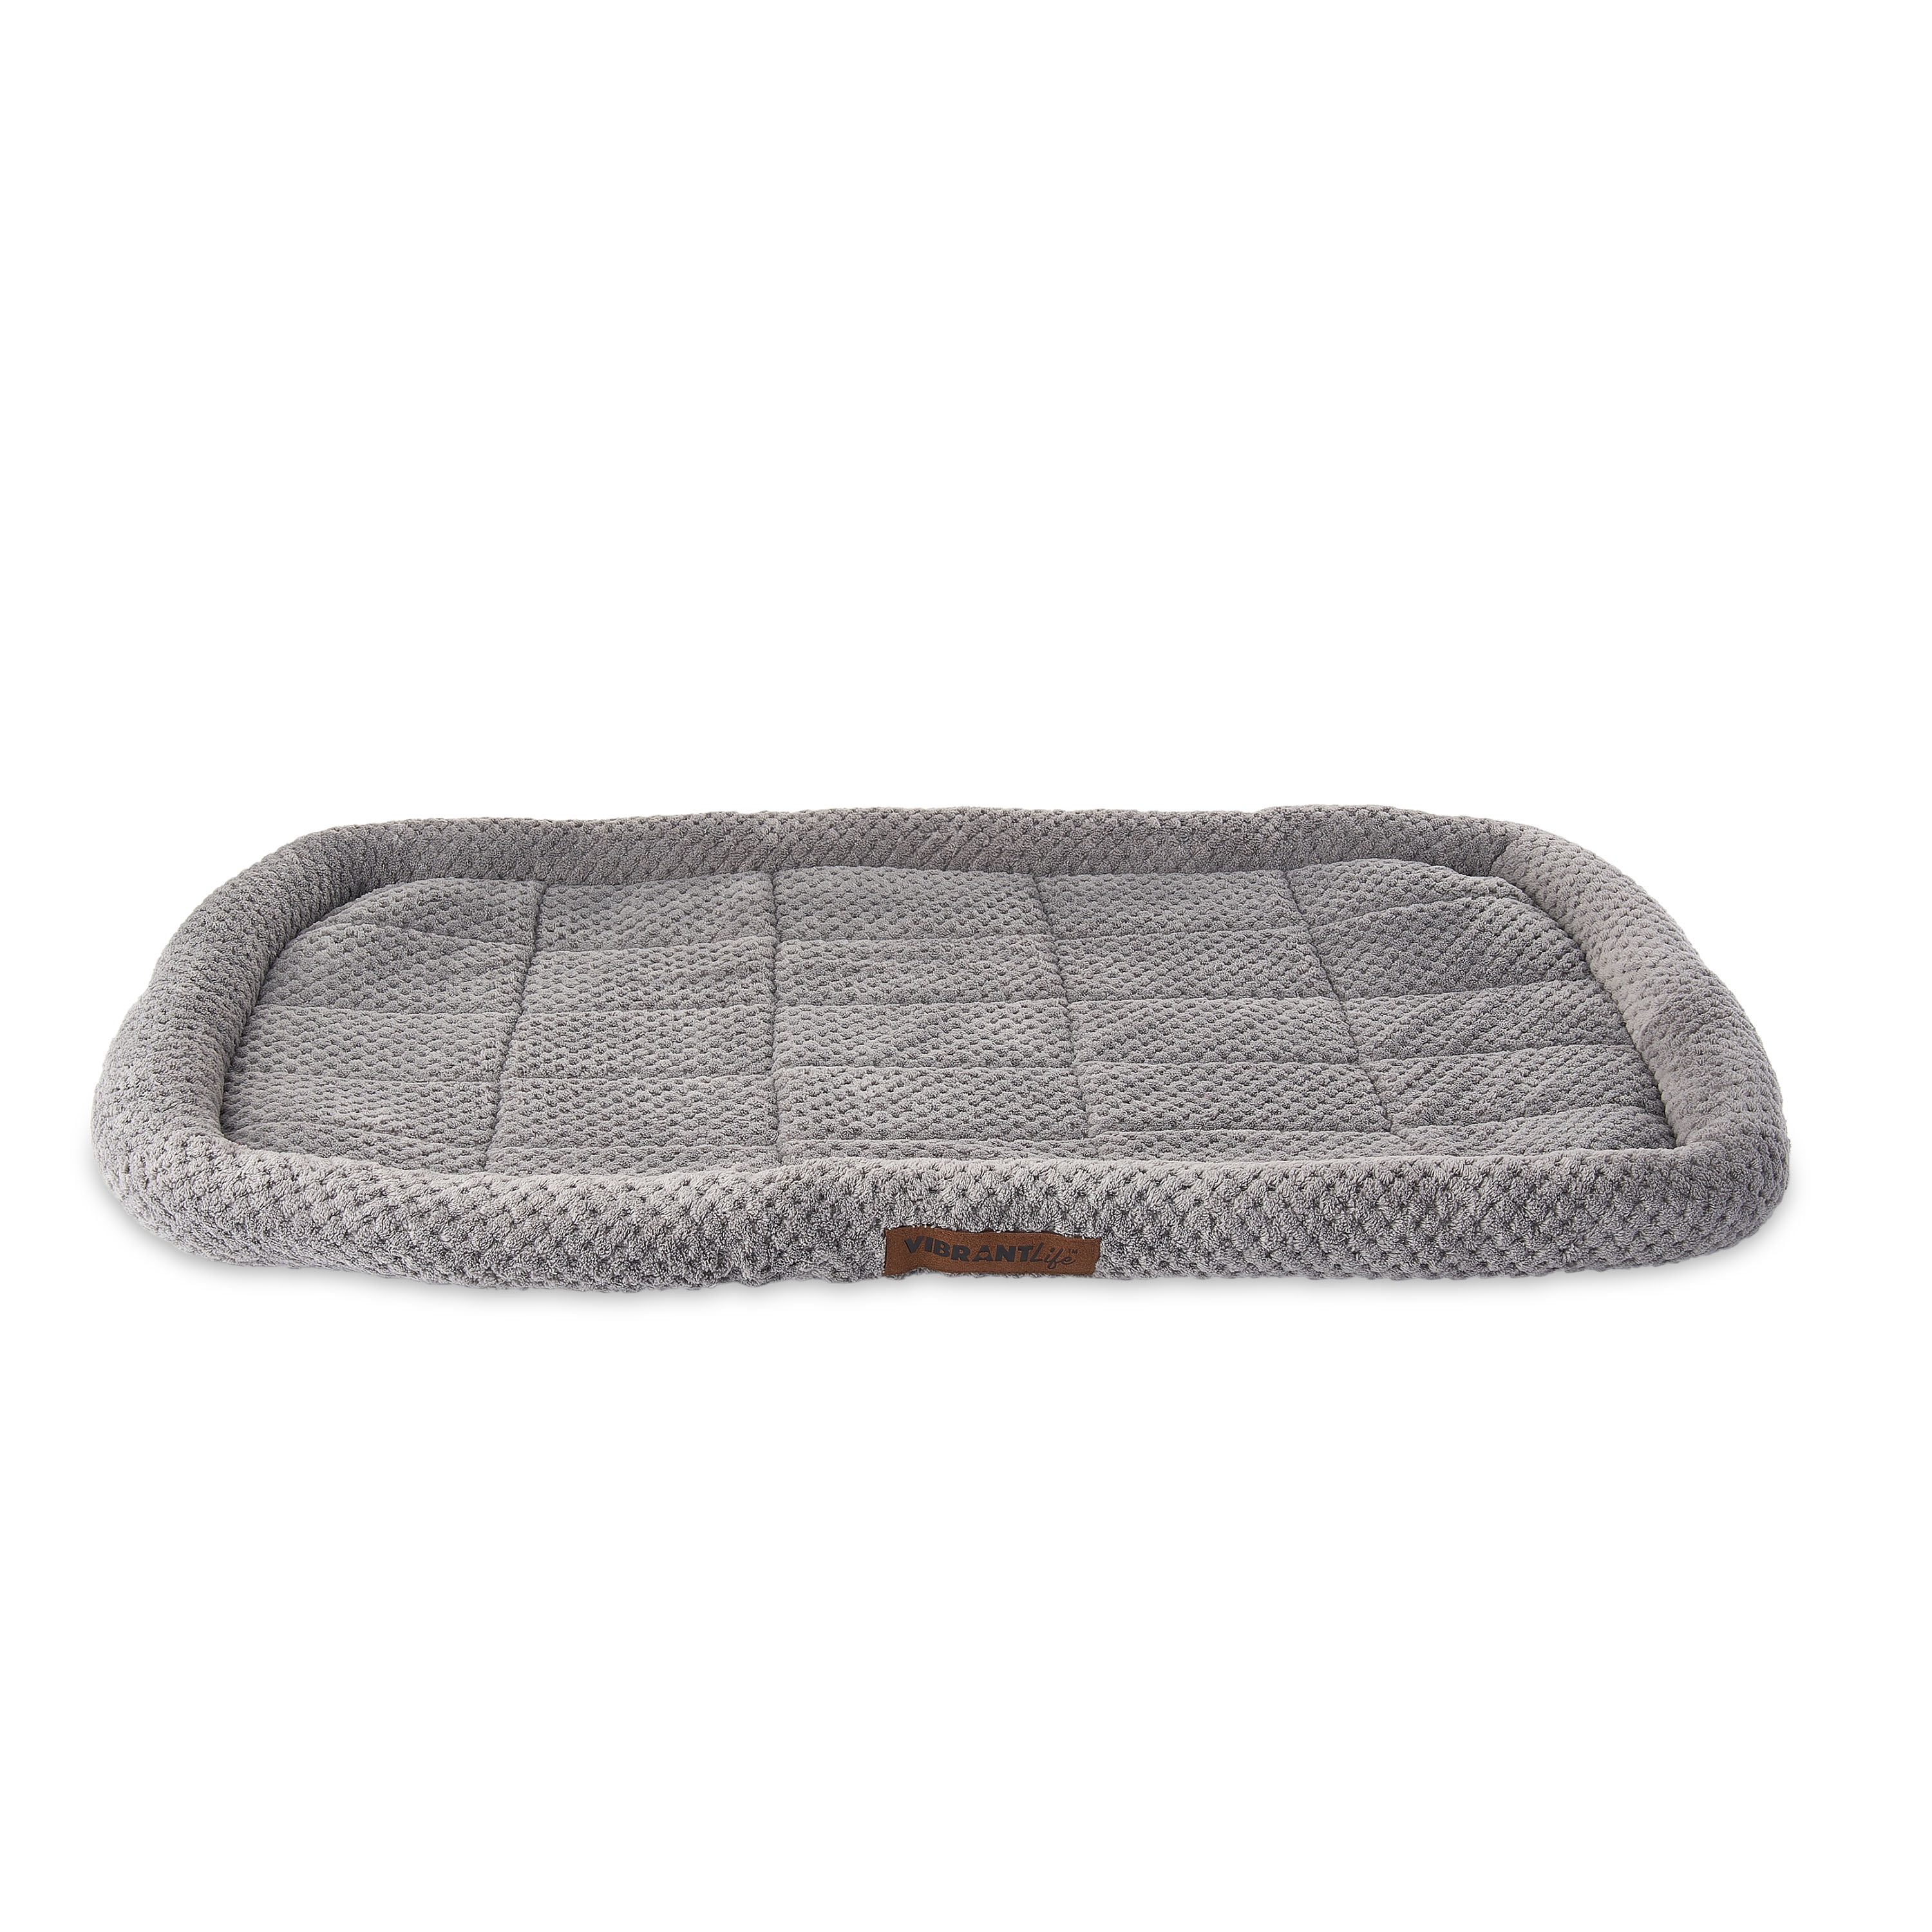 Vibrant Life Large Cozy Luxe Crate Mat Pet Bed, Gray